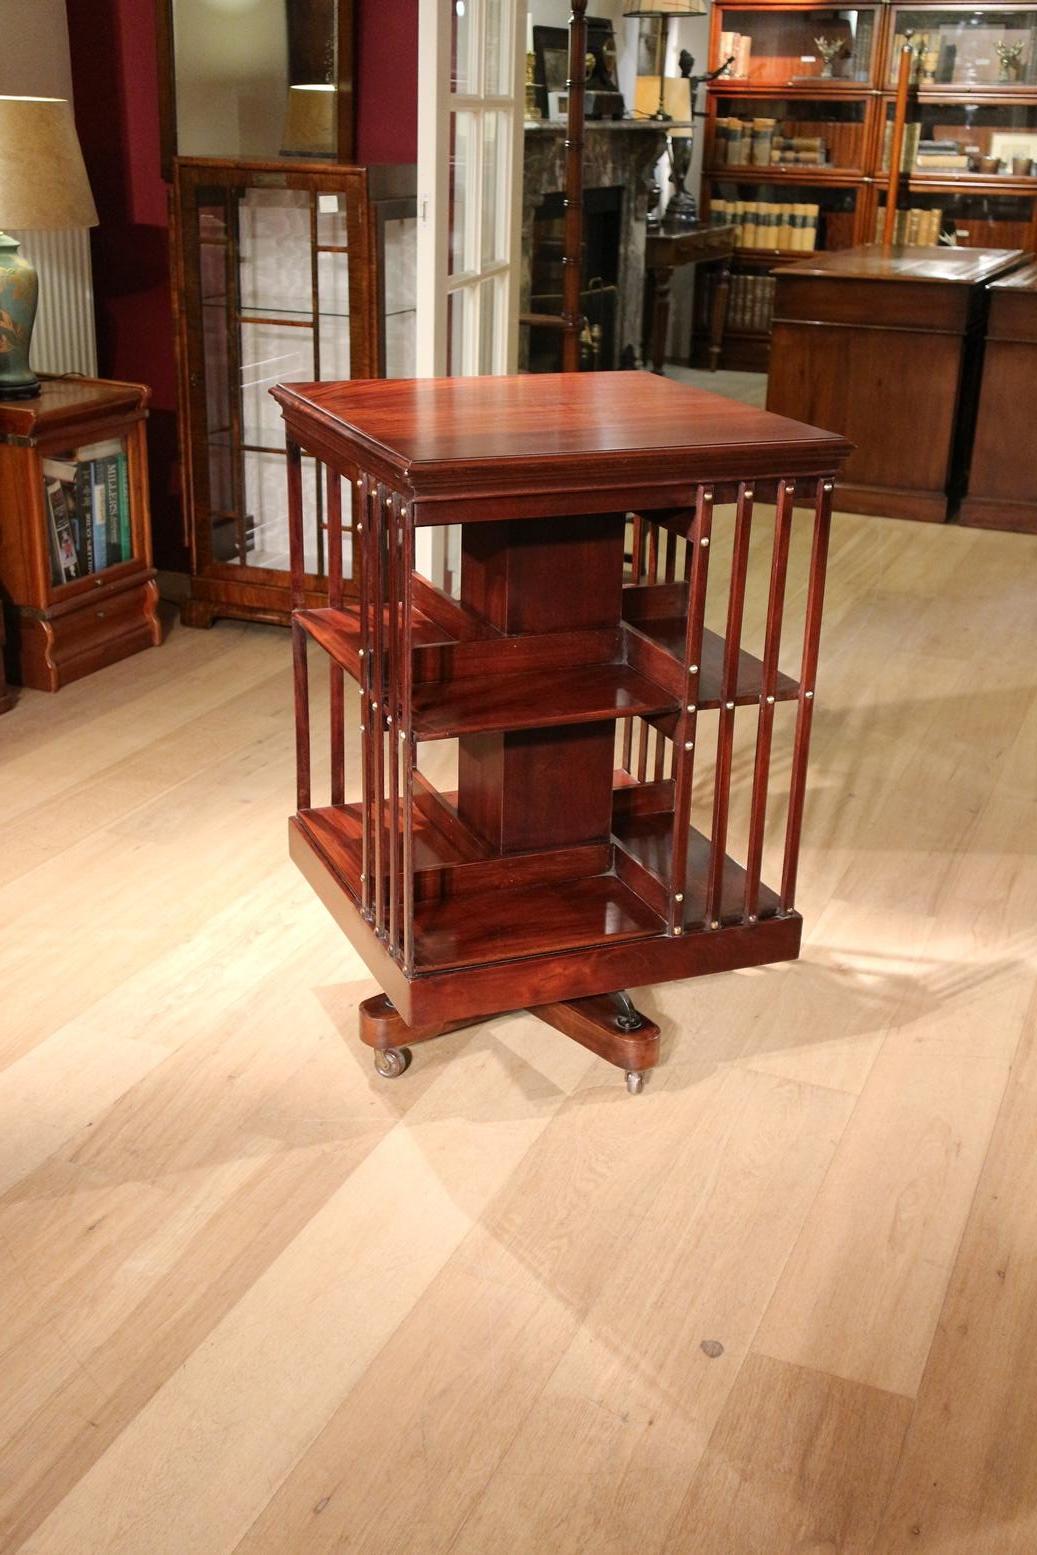 Beautiful large mahogany book mill in perfect condition. It is a very solid book mill with a cast iron base. Made circa 1900 by the company Maple & Co. Beautiful warm color. Size: 60cm x 60cm x H 94cm The maker Maple & Co was the most important